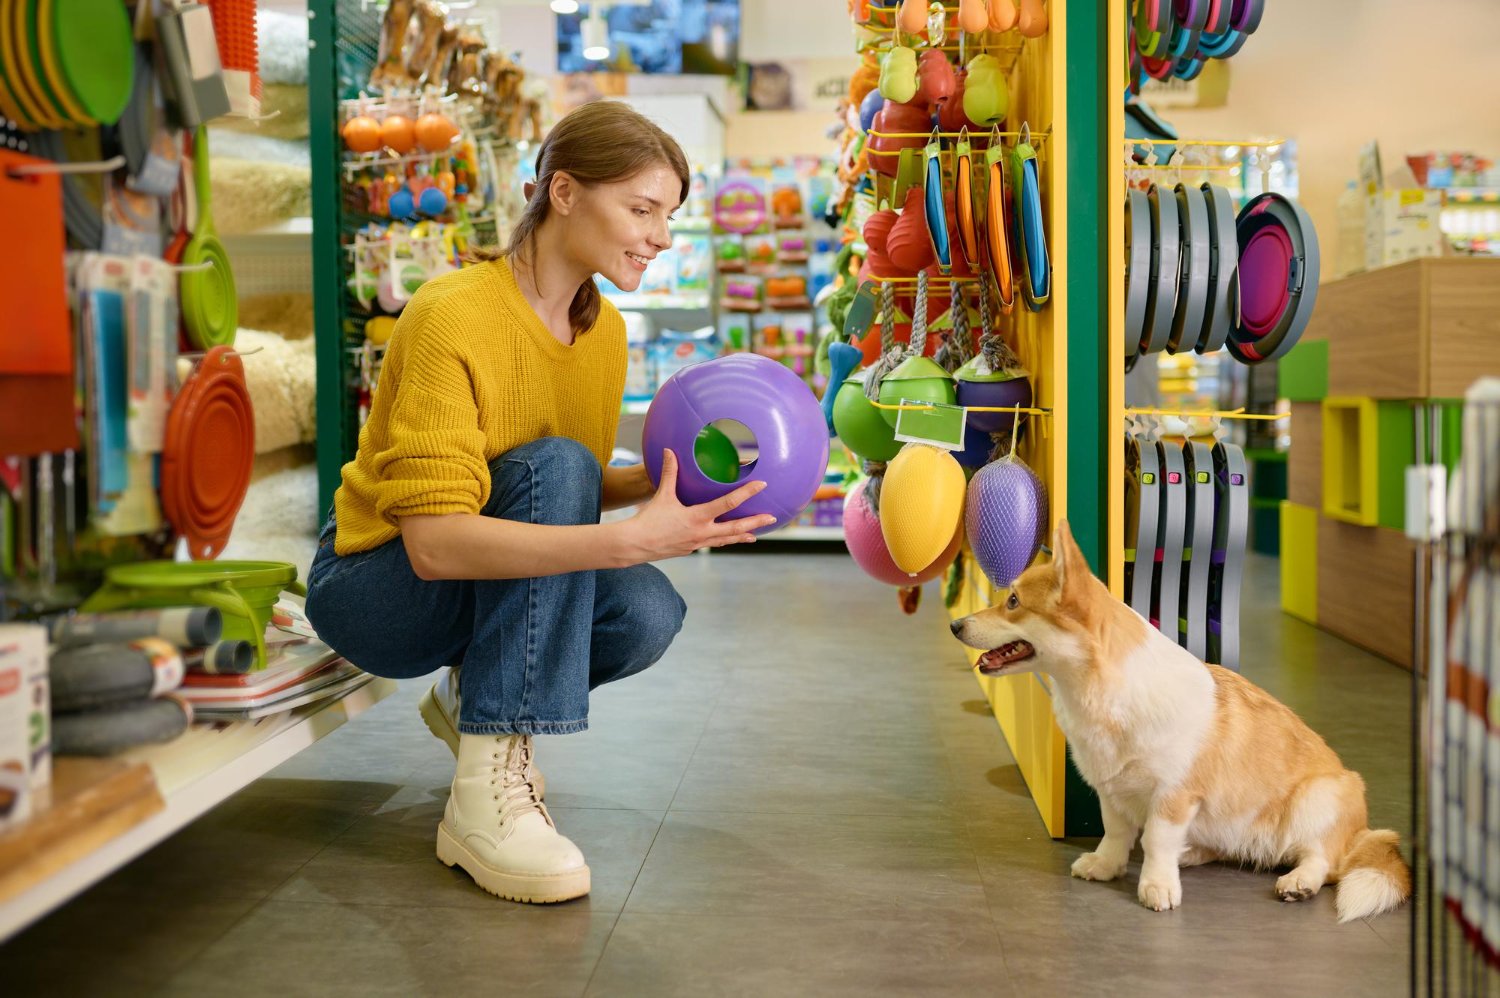 Treat Your Pets With Quality Products From Petshop’s Wide Range